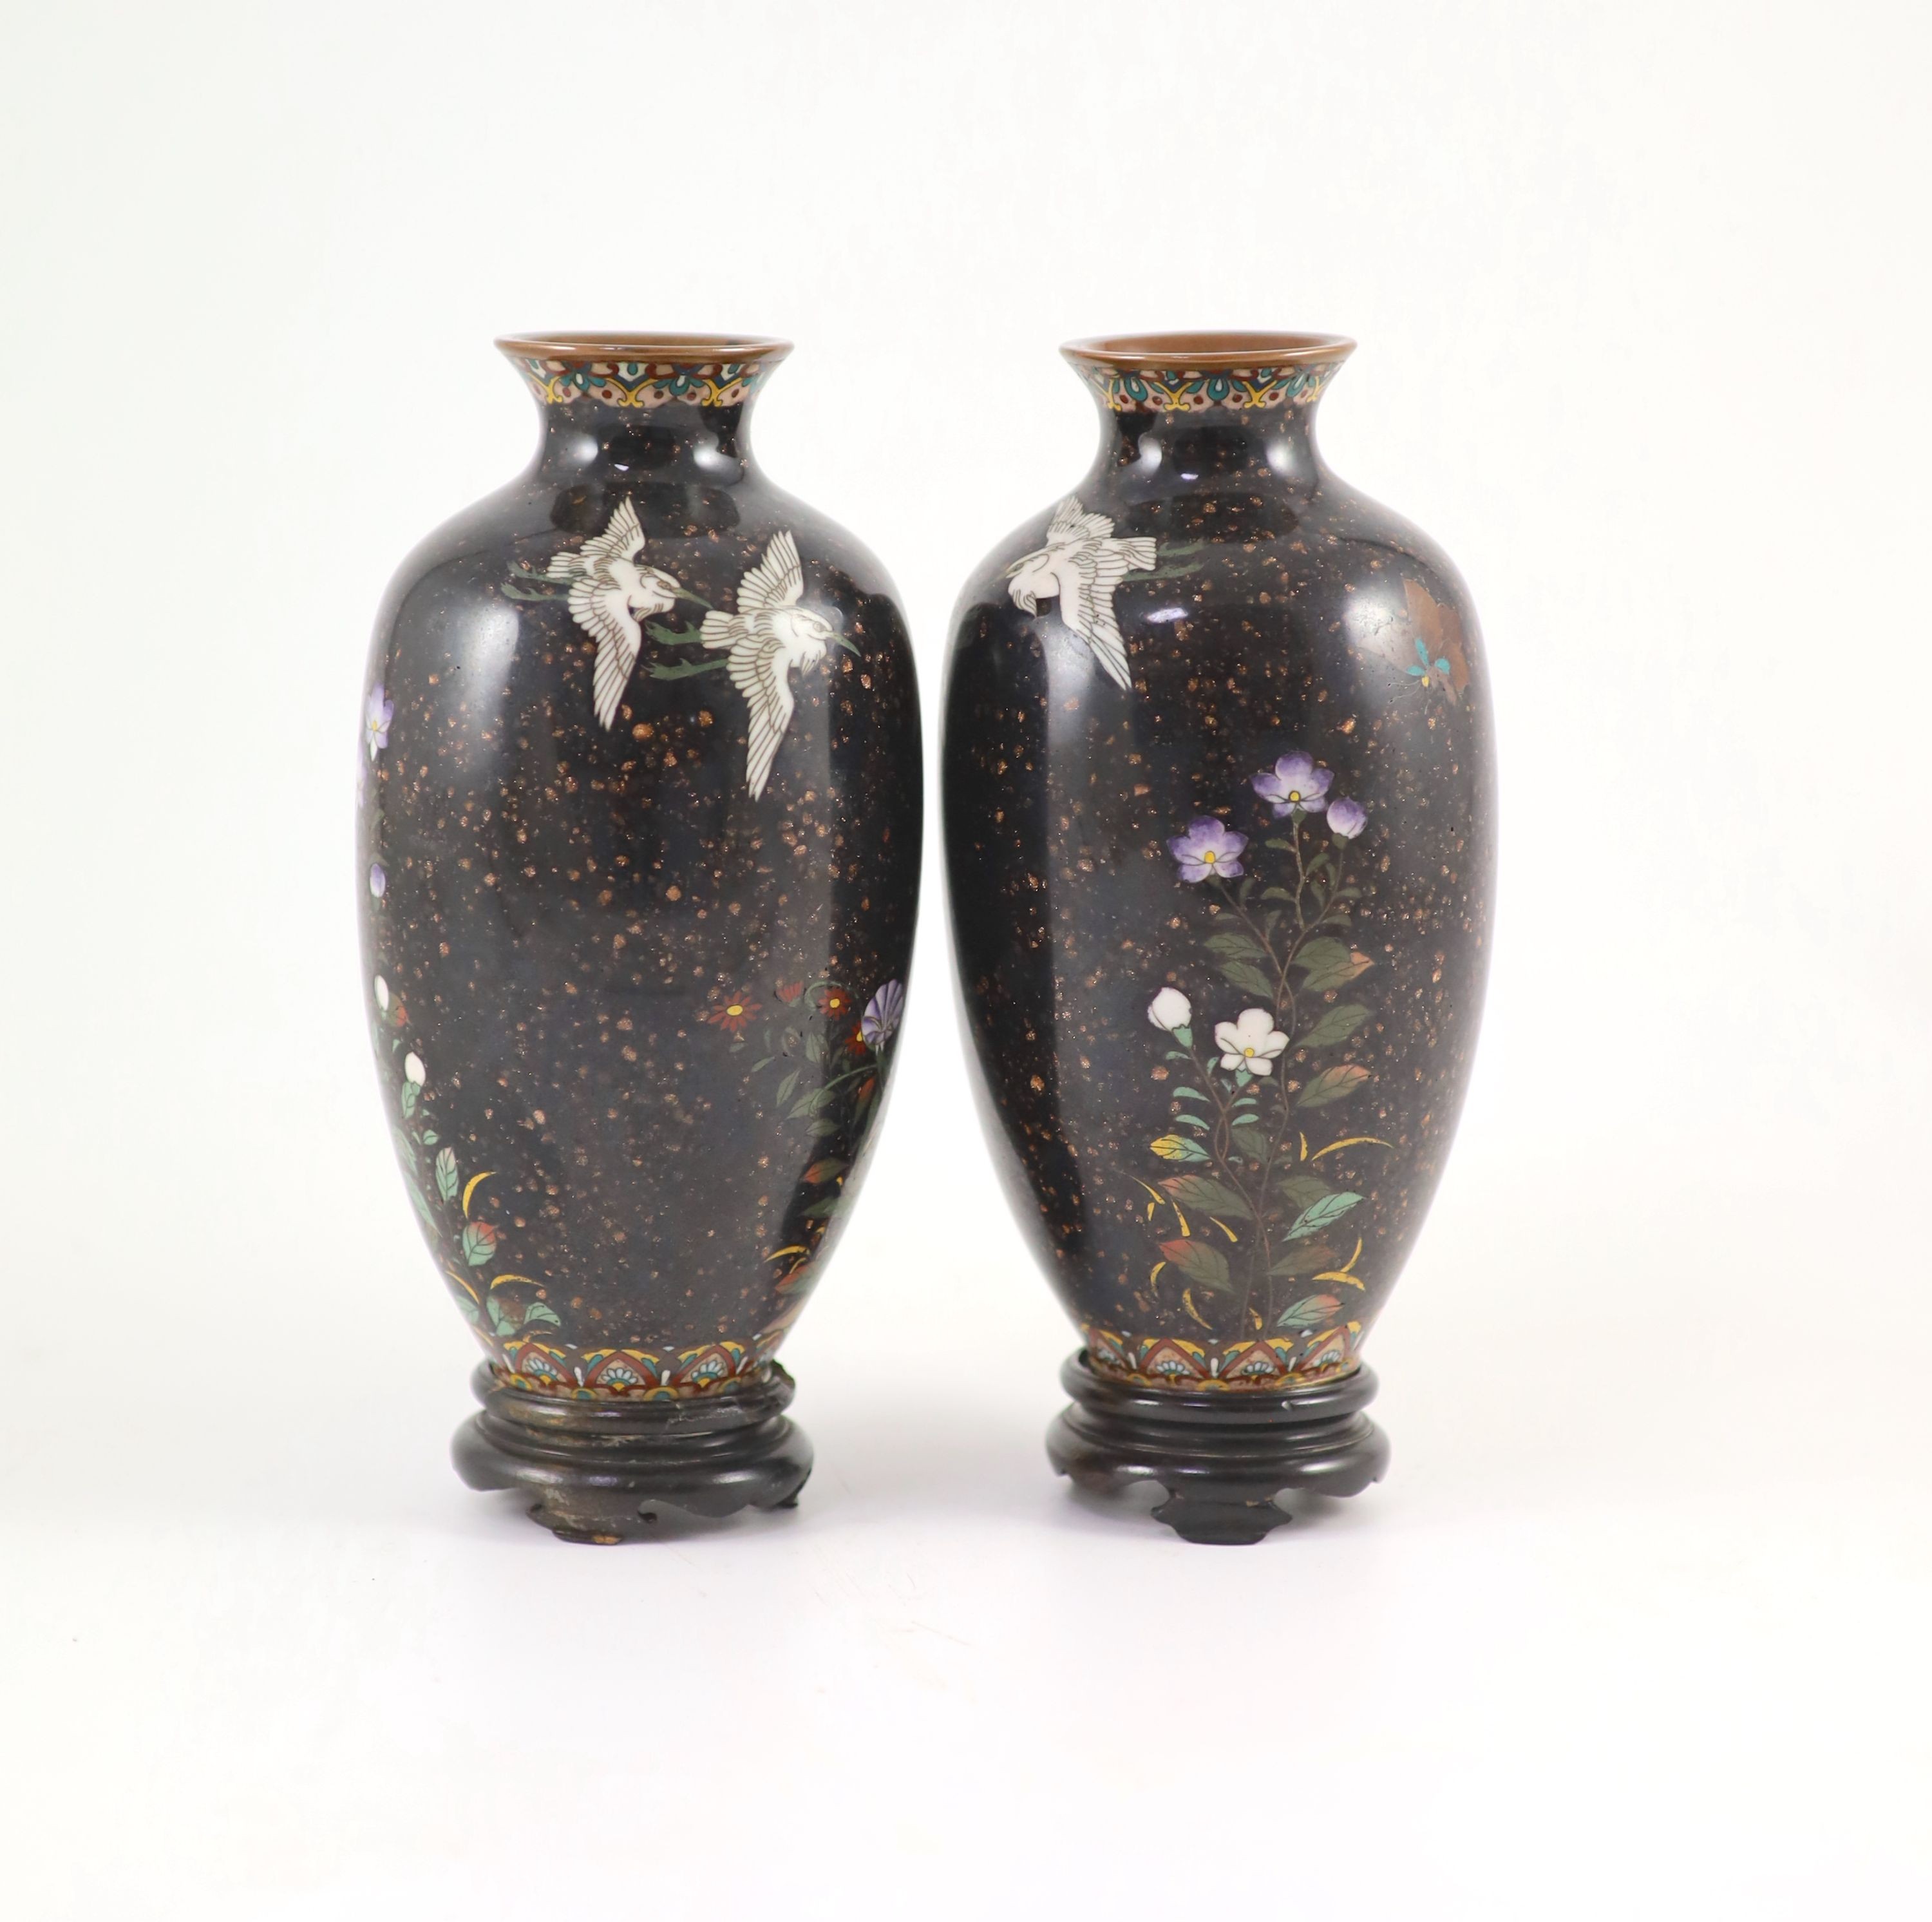 A pair of Japanese silver wire cloisonné enamel ‘egret’ vases, Meiji period, 18.5 cm high, wood stands